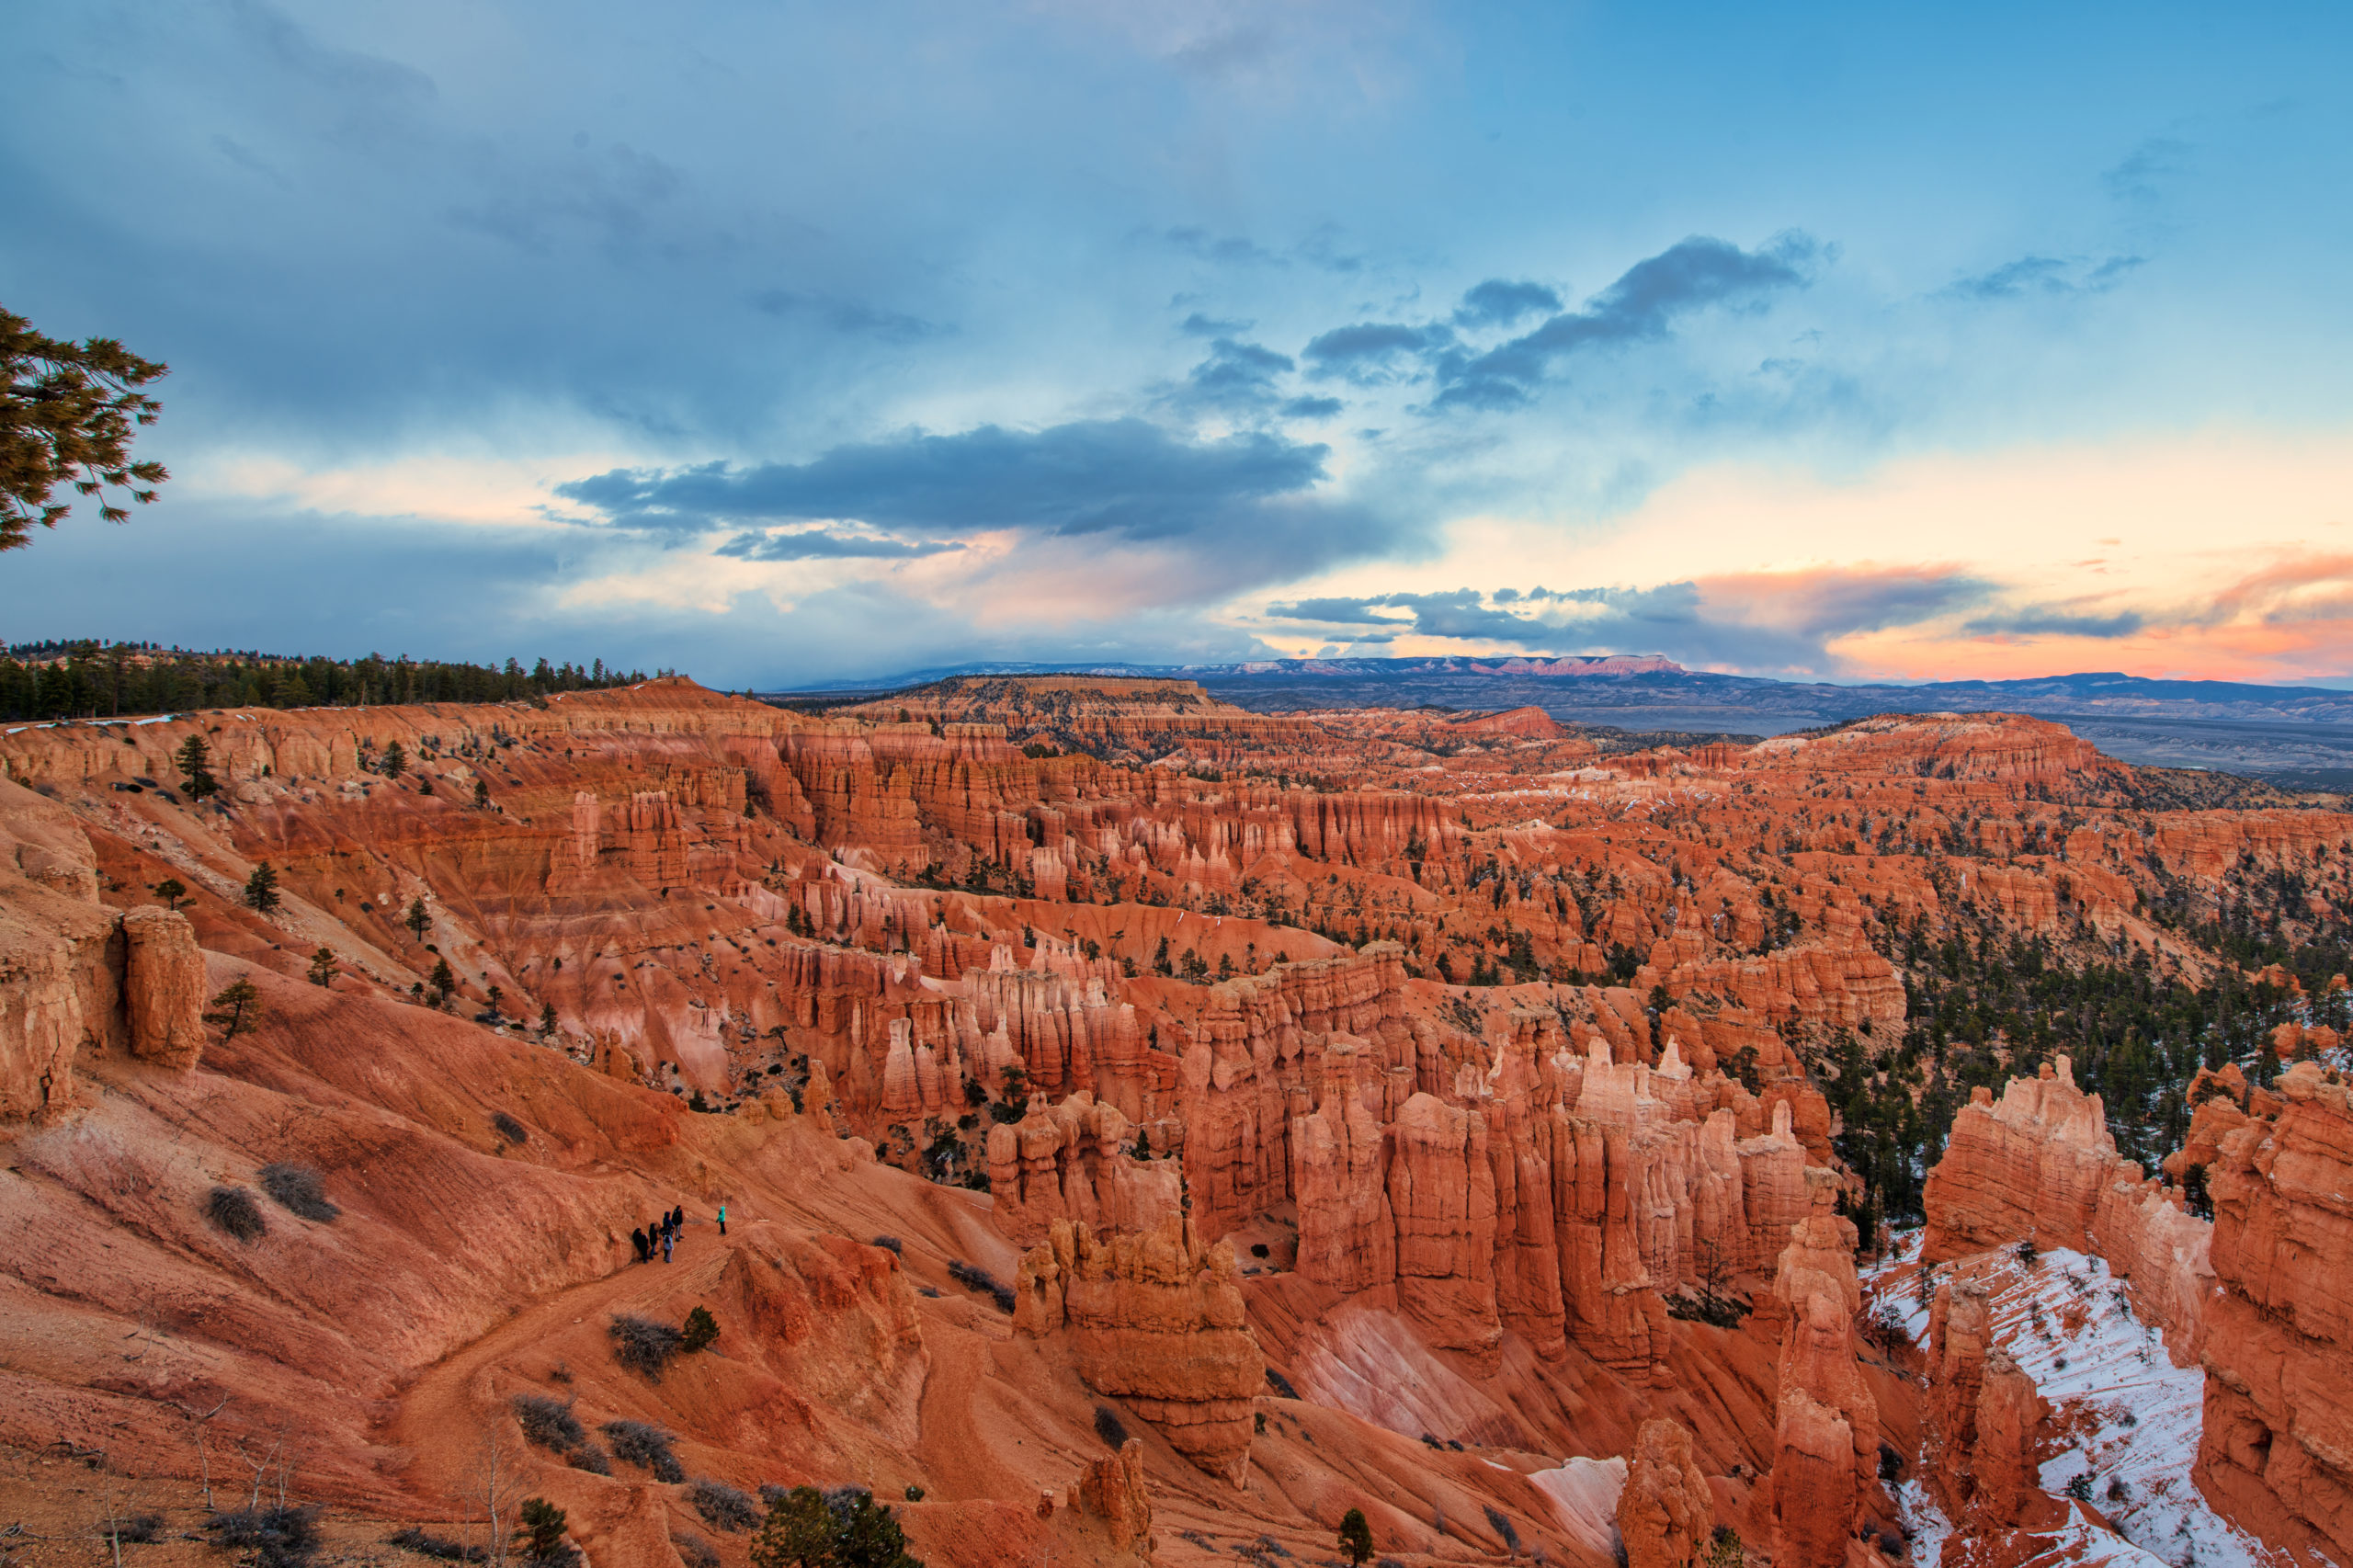 the landscape at Bryce Canyon National Park is beautiful and colorful at sunset